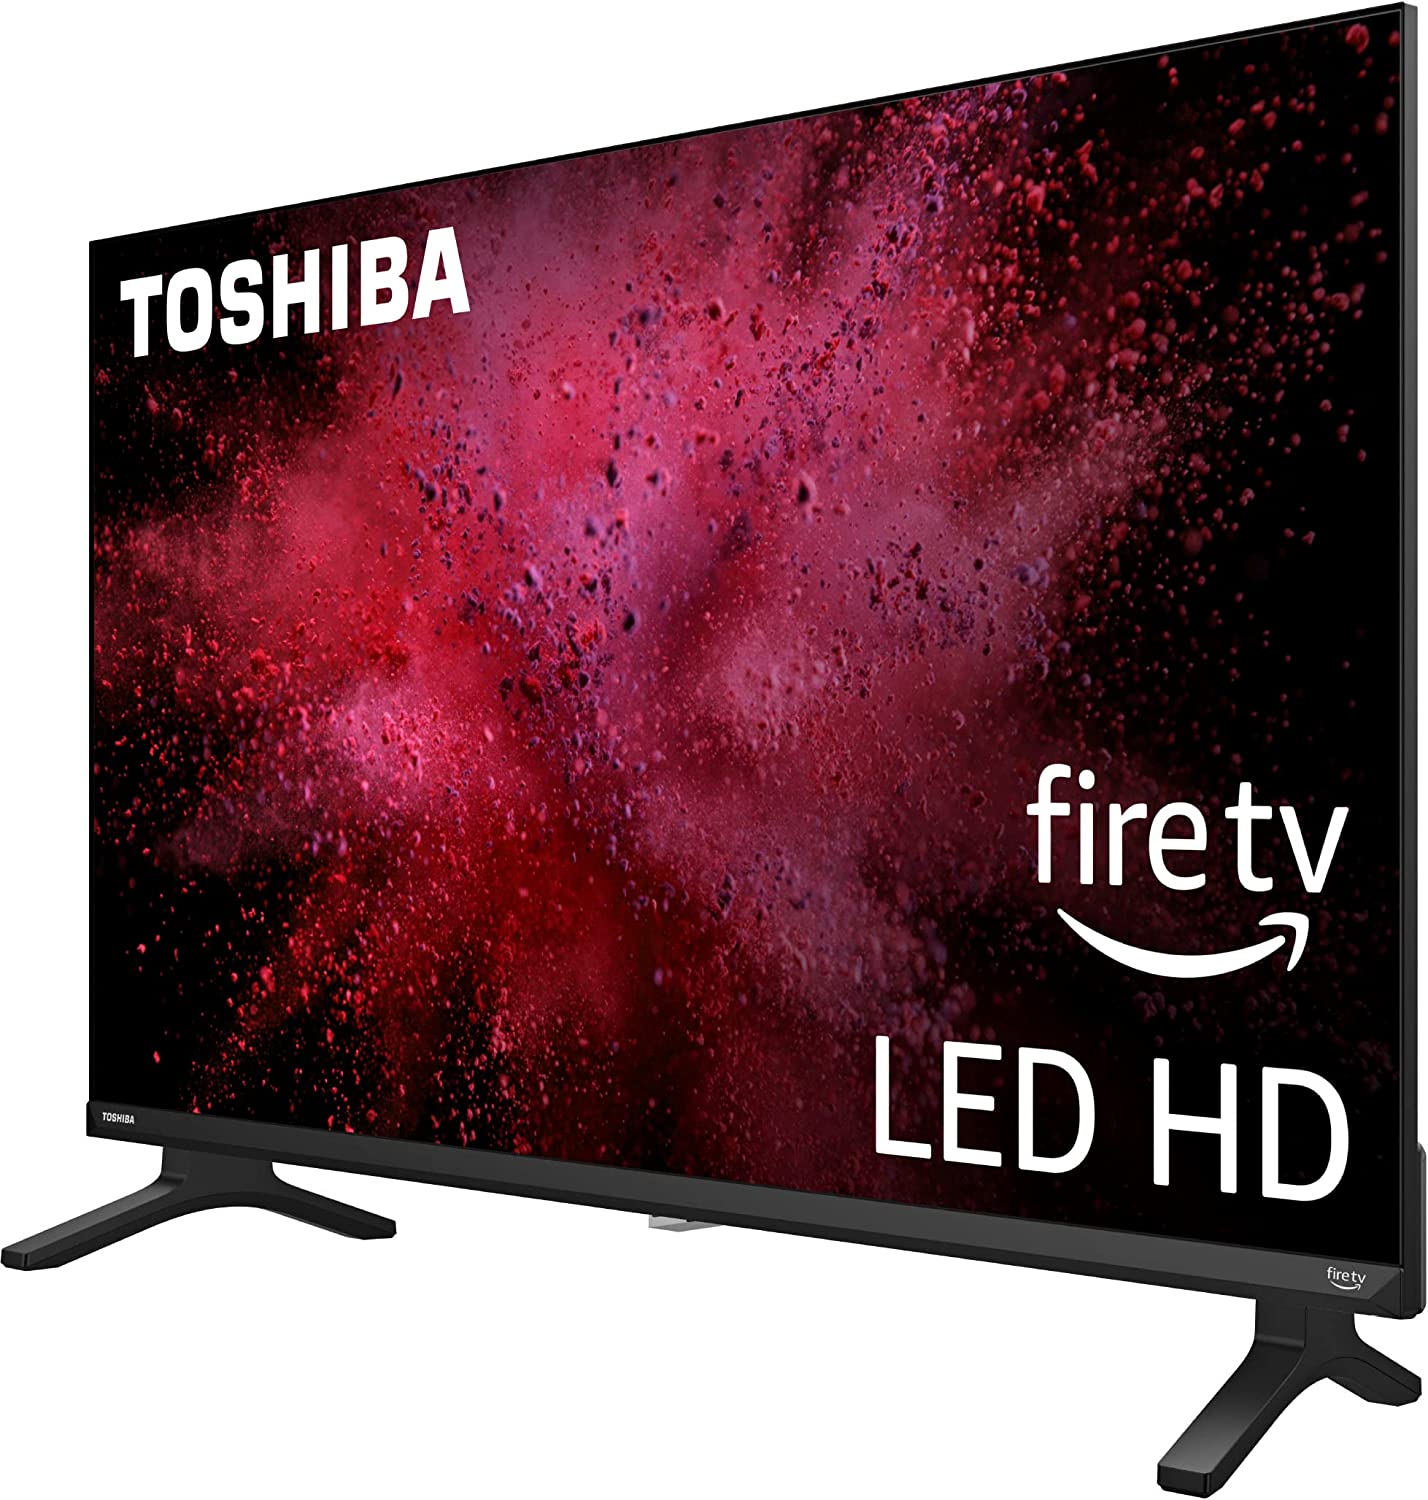 Toshiba 32-inch Class V35 Series LED HD Smart Fire TV Review